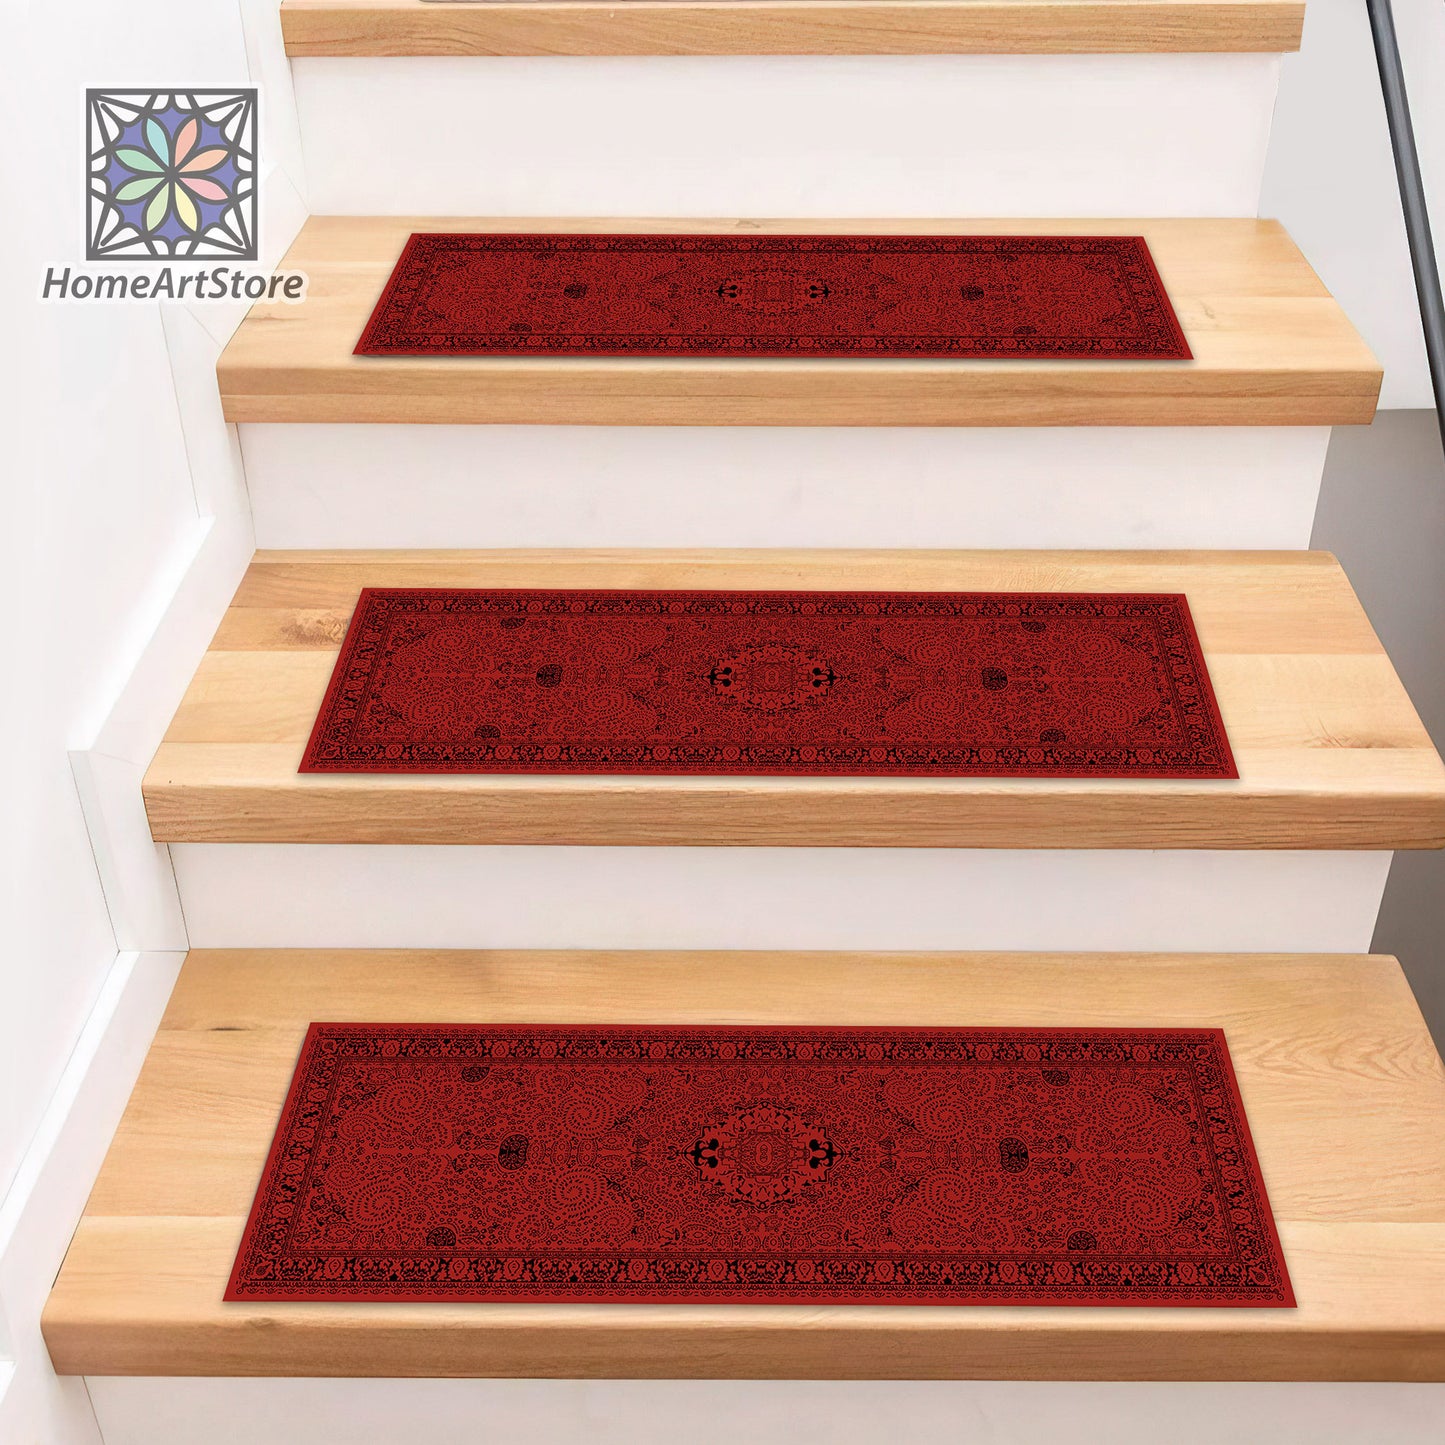 Scandinavian Stair Step Mats, Red and Black Boho Style Stair Mats, Cool Stair Tread Carpet, Nonslip Backing Modern Step Rugs